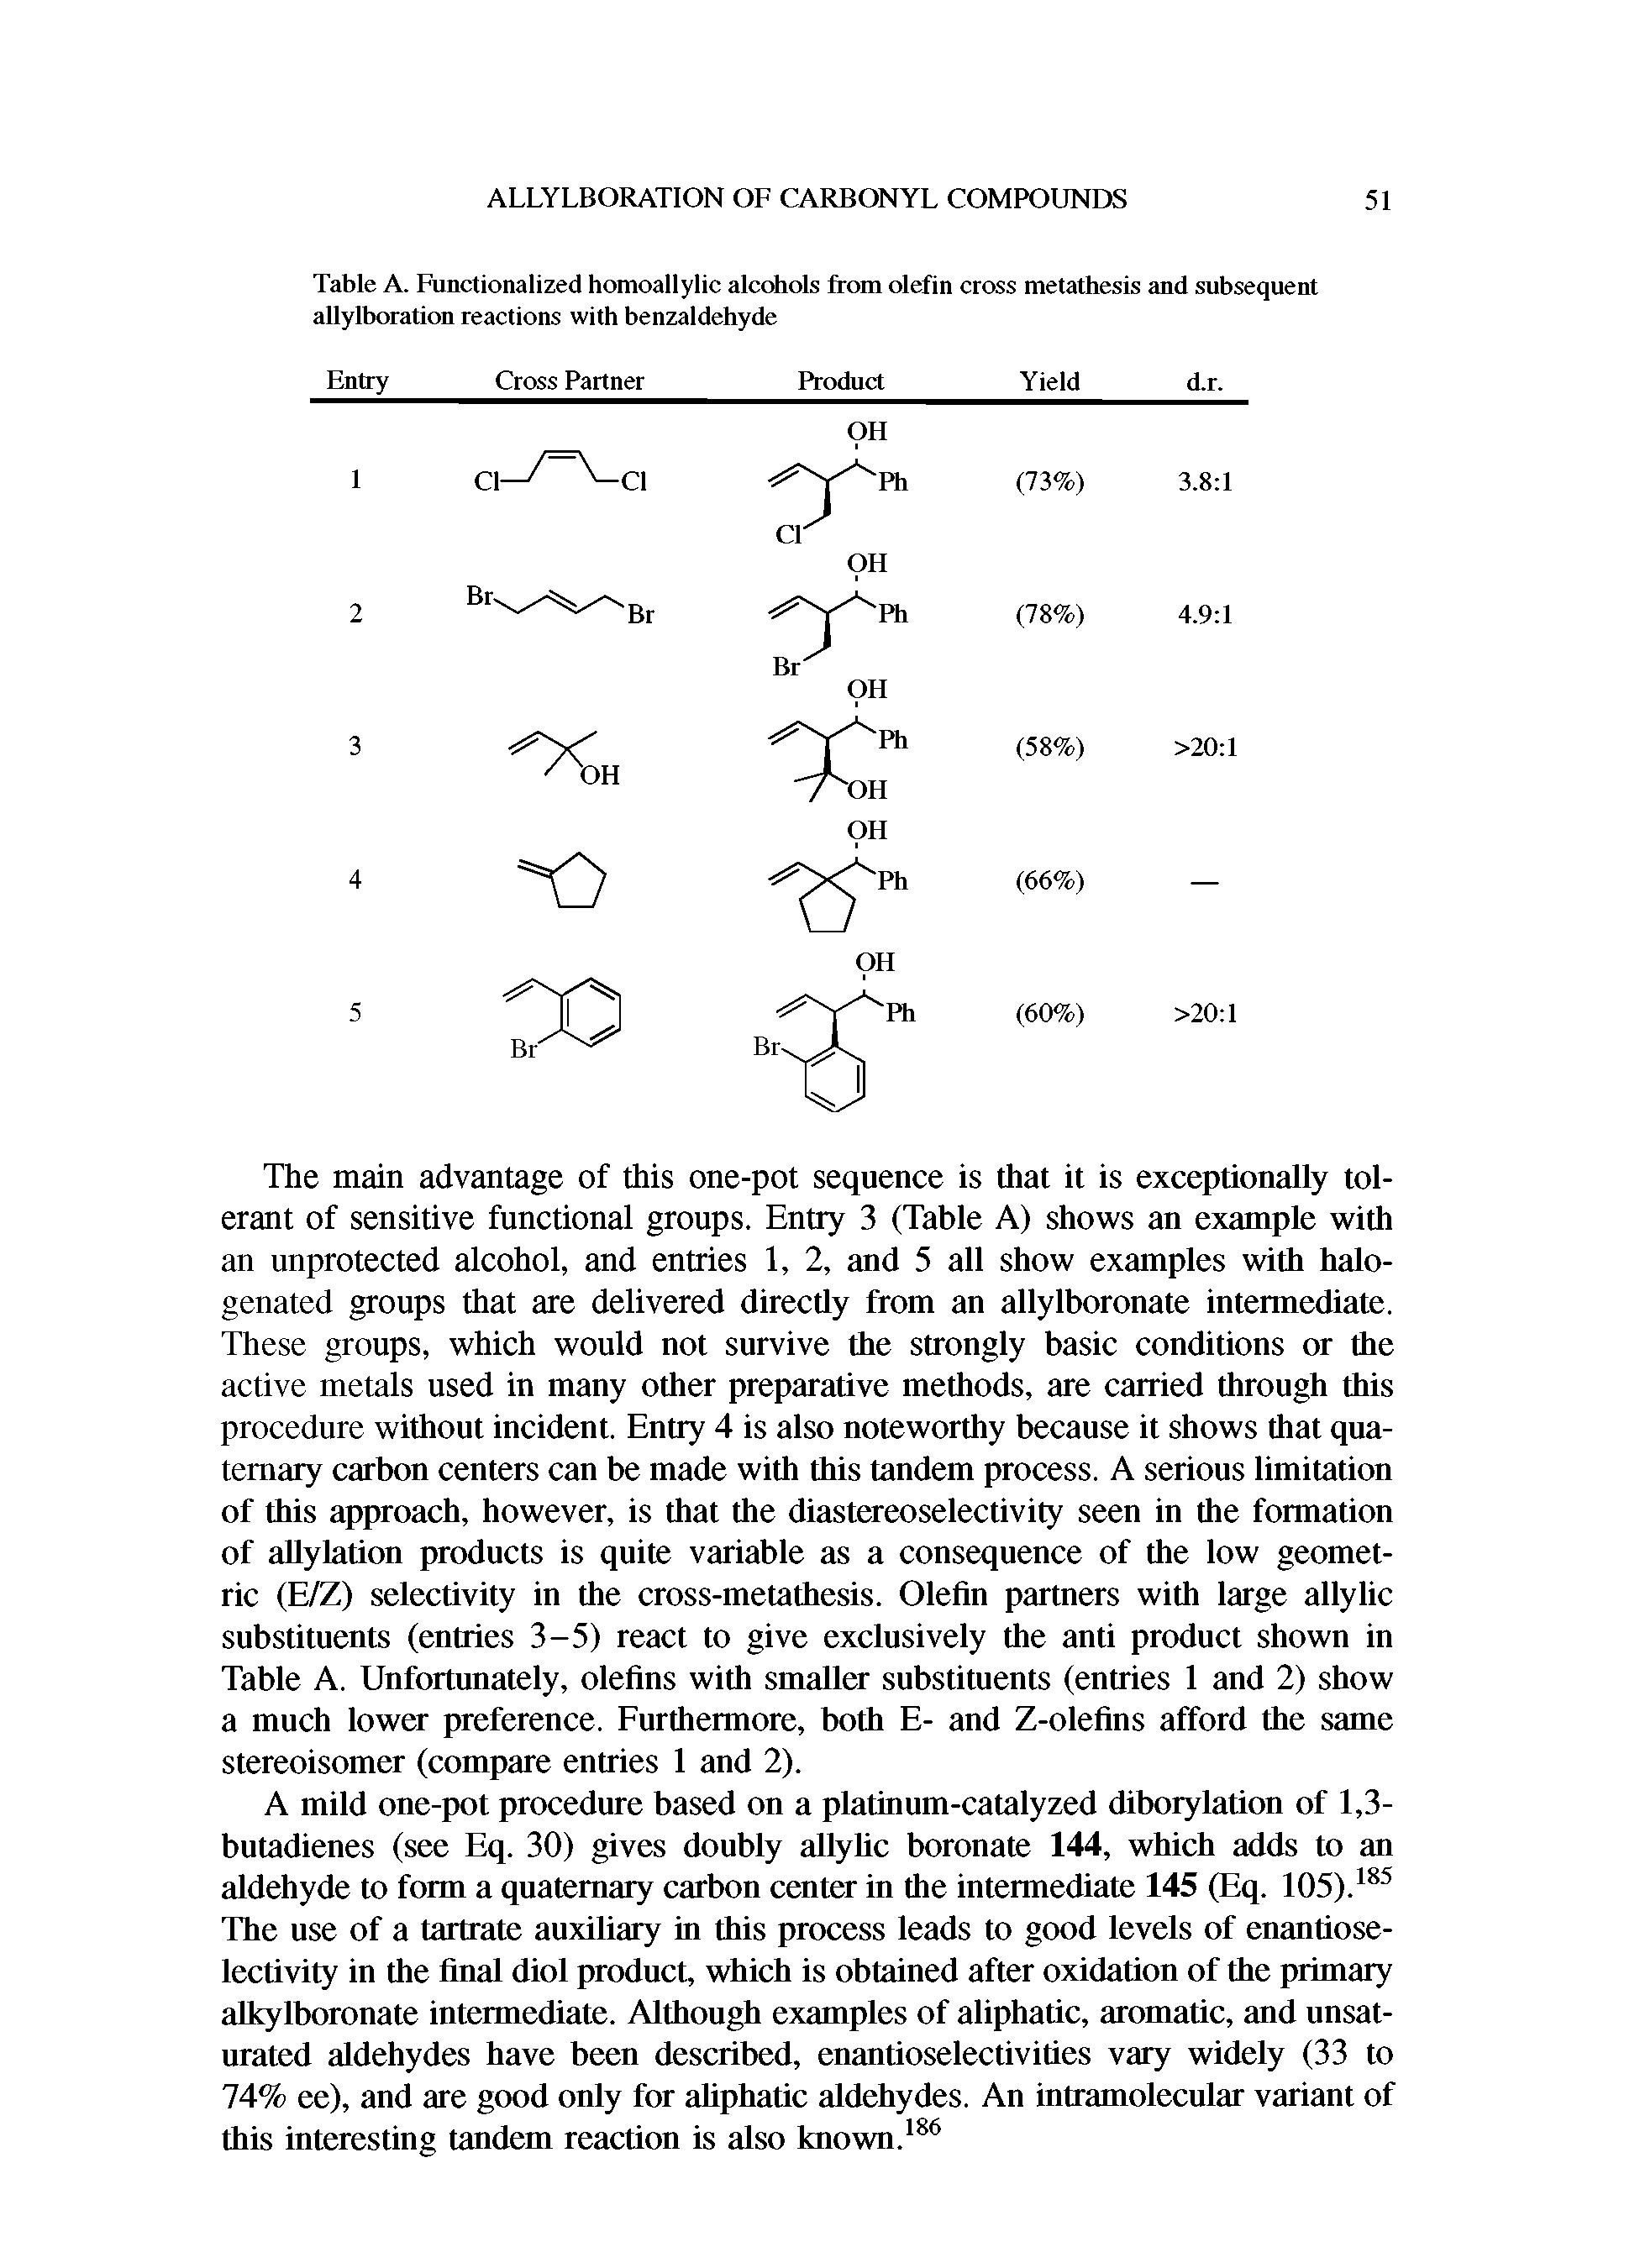 Table A. Functionalized homoallylic alcohols from olefin cross metathesis and subsequent allylboration reactions with benzaldehyde...